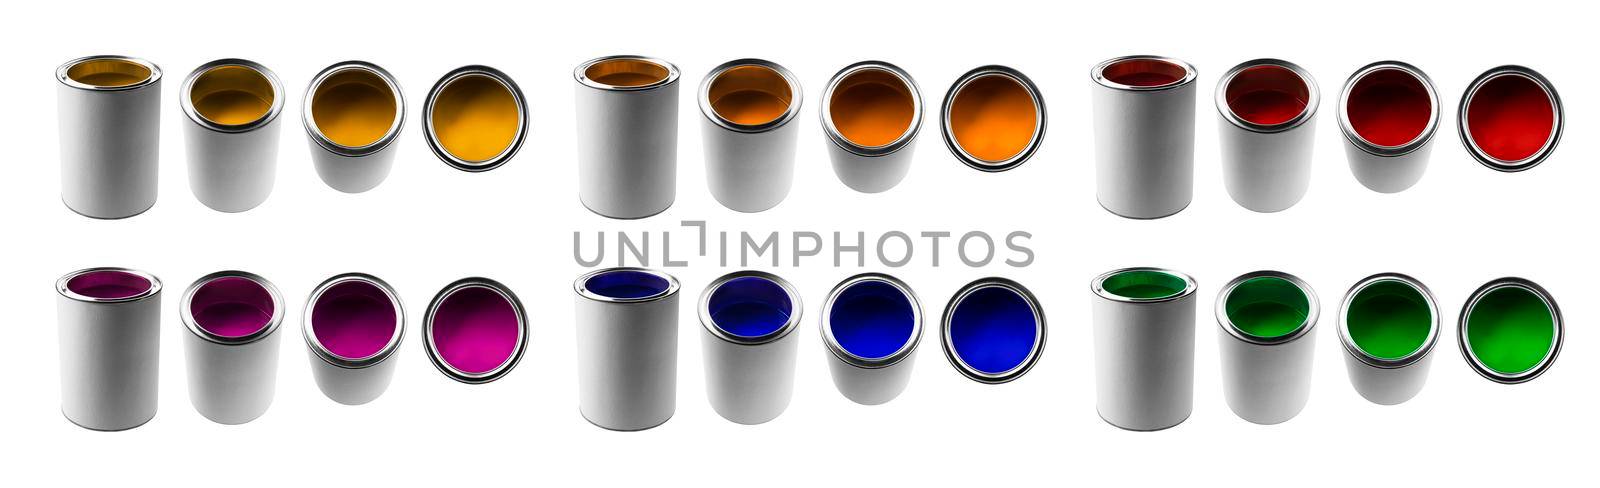 Cans with different colors of paints in different angles on a white background by butenkow